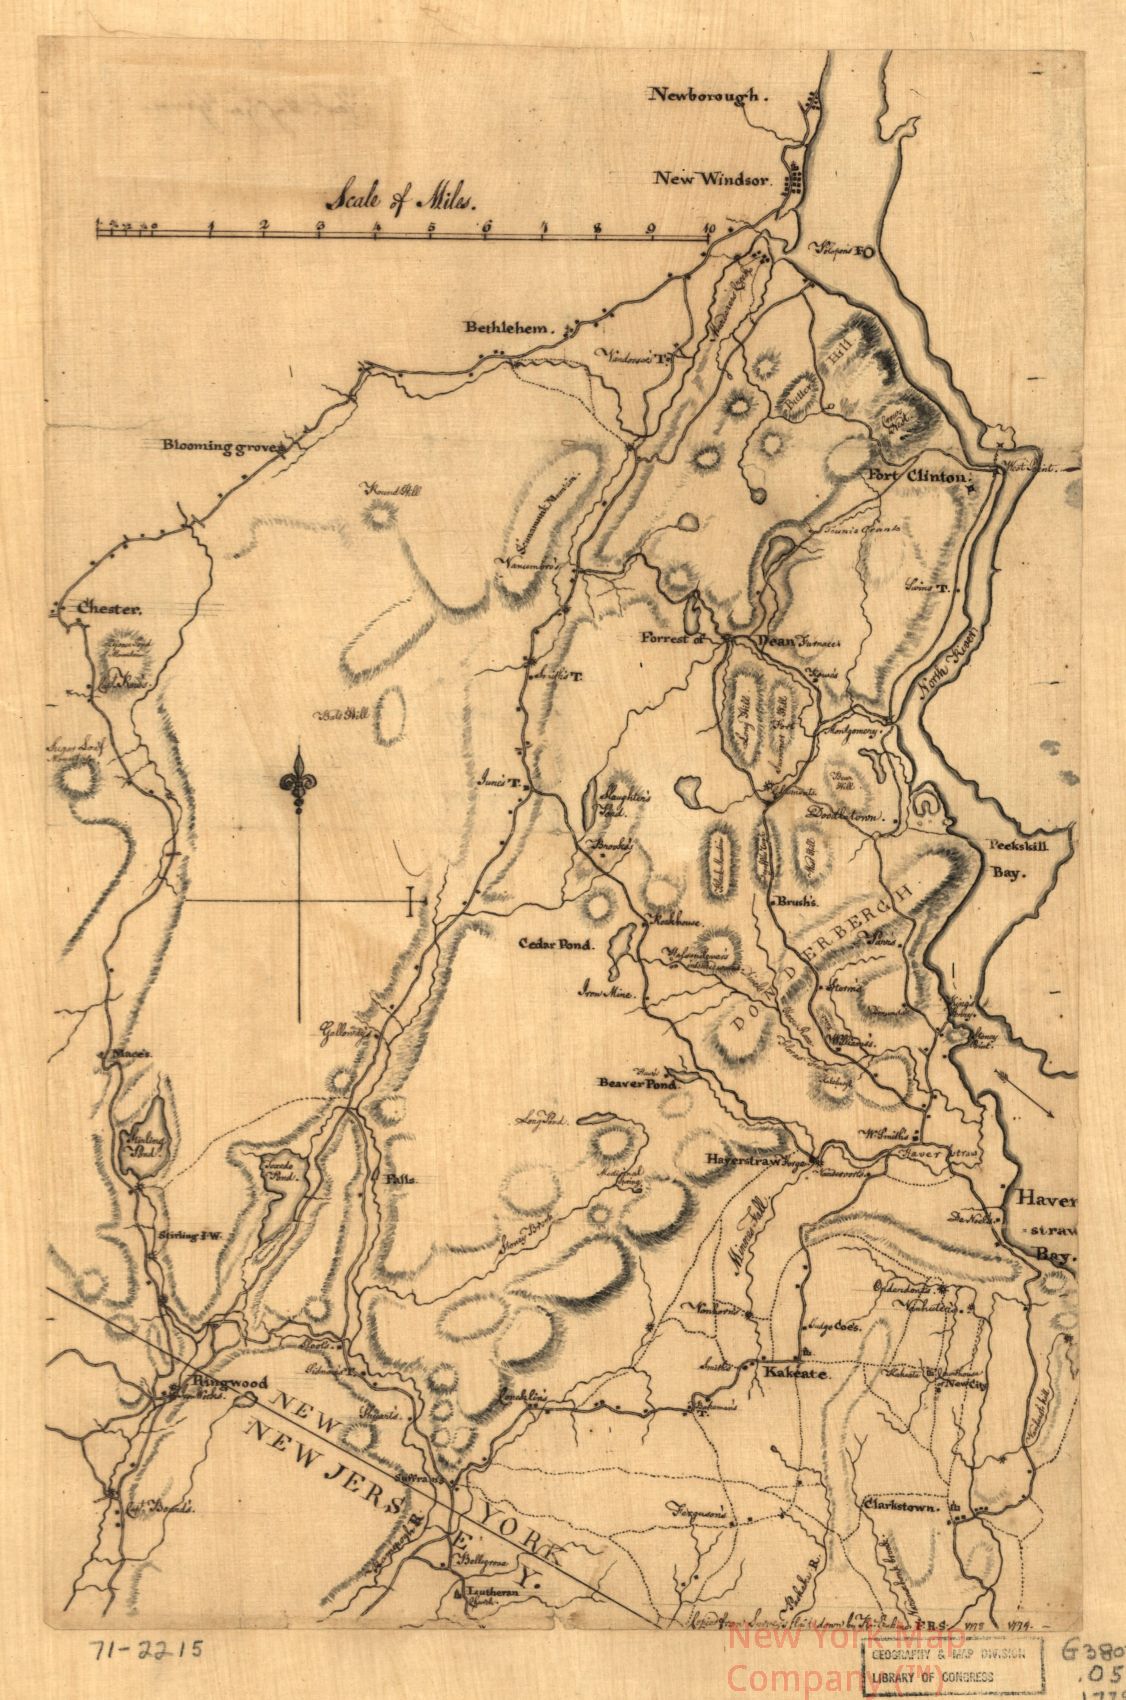 1779 map Map of Orange and Rockland counties area of New York. Map Subjects: New York | Orange County | Orange County NY | Rockland County | Rockland County NY |